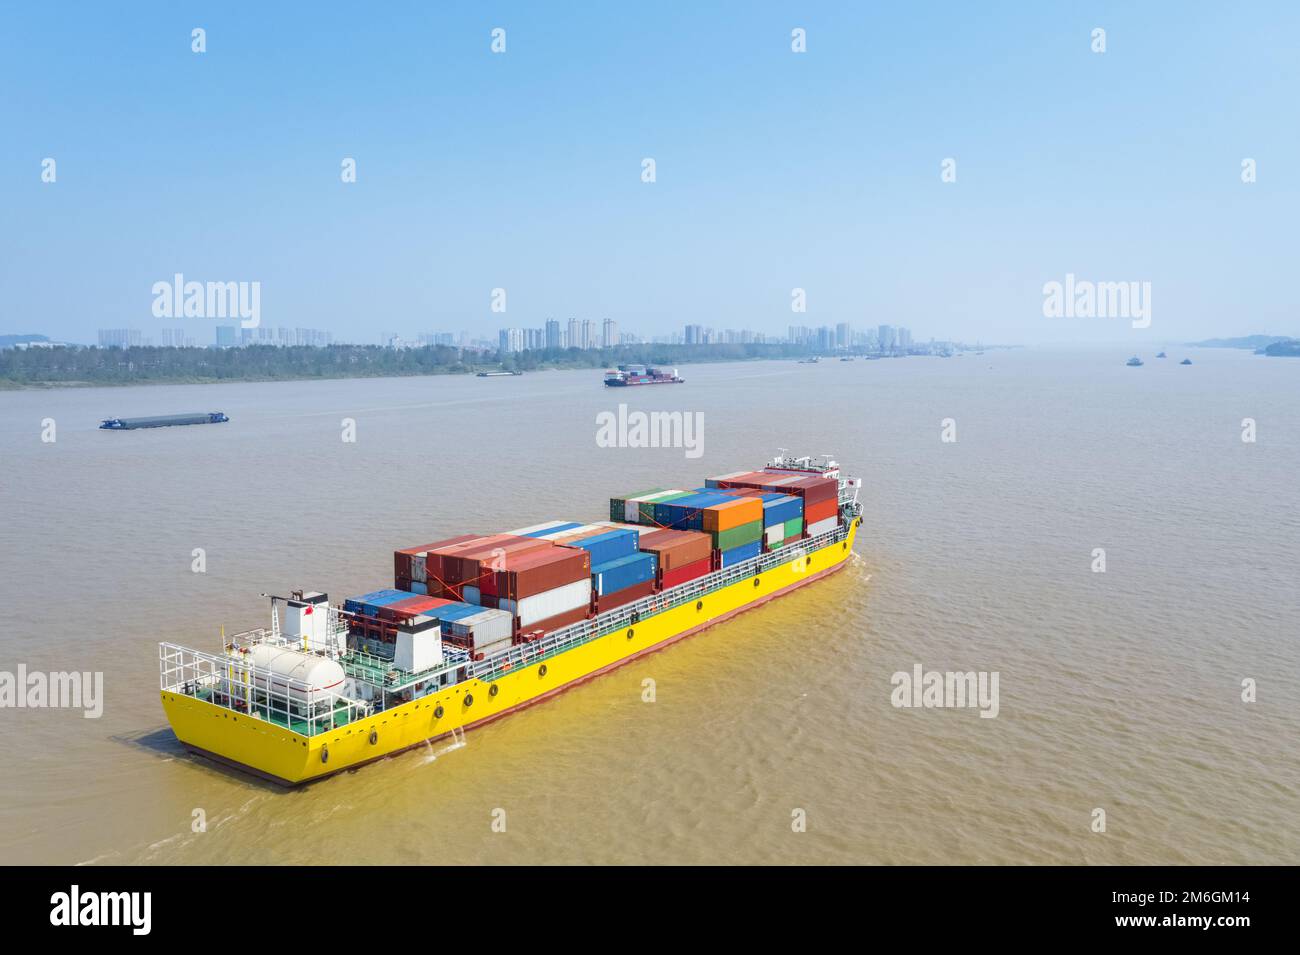 Container ship on the yangtze river Stock Photo